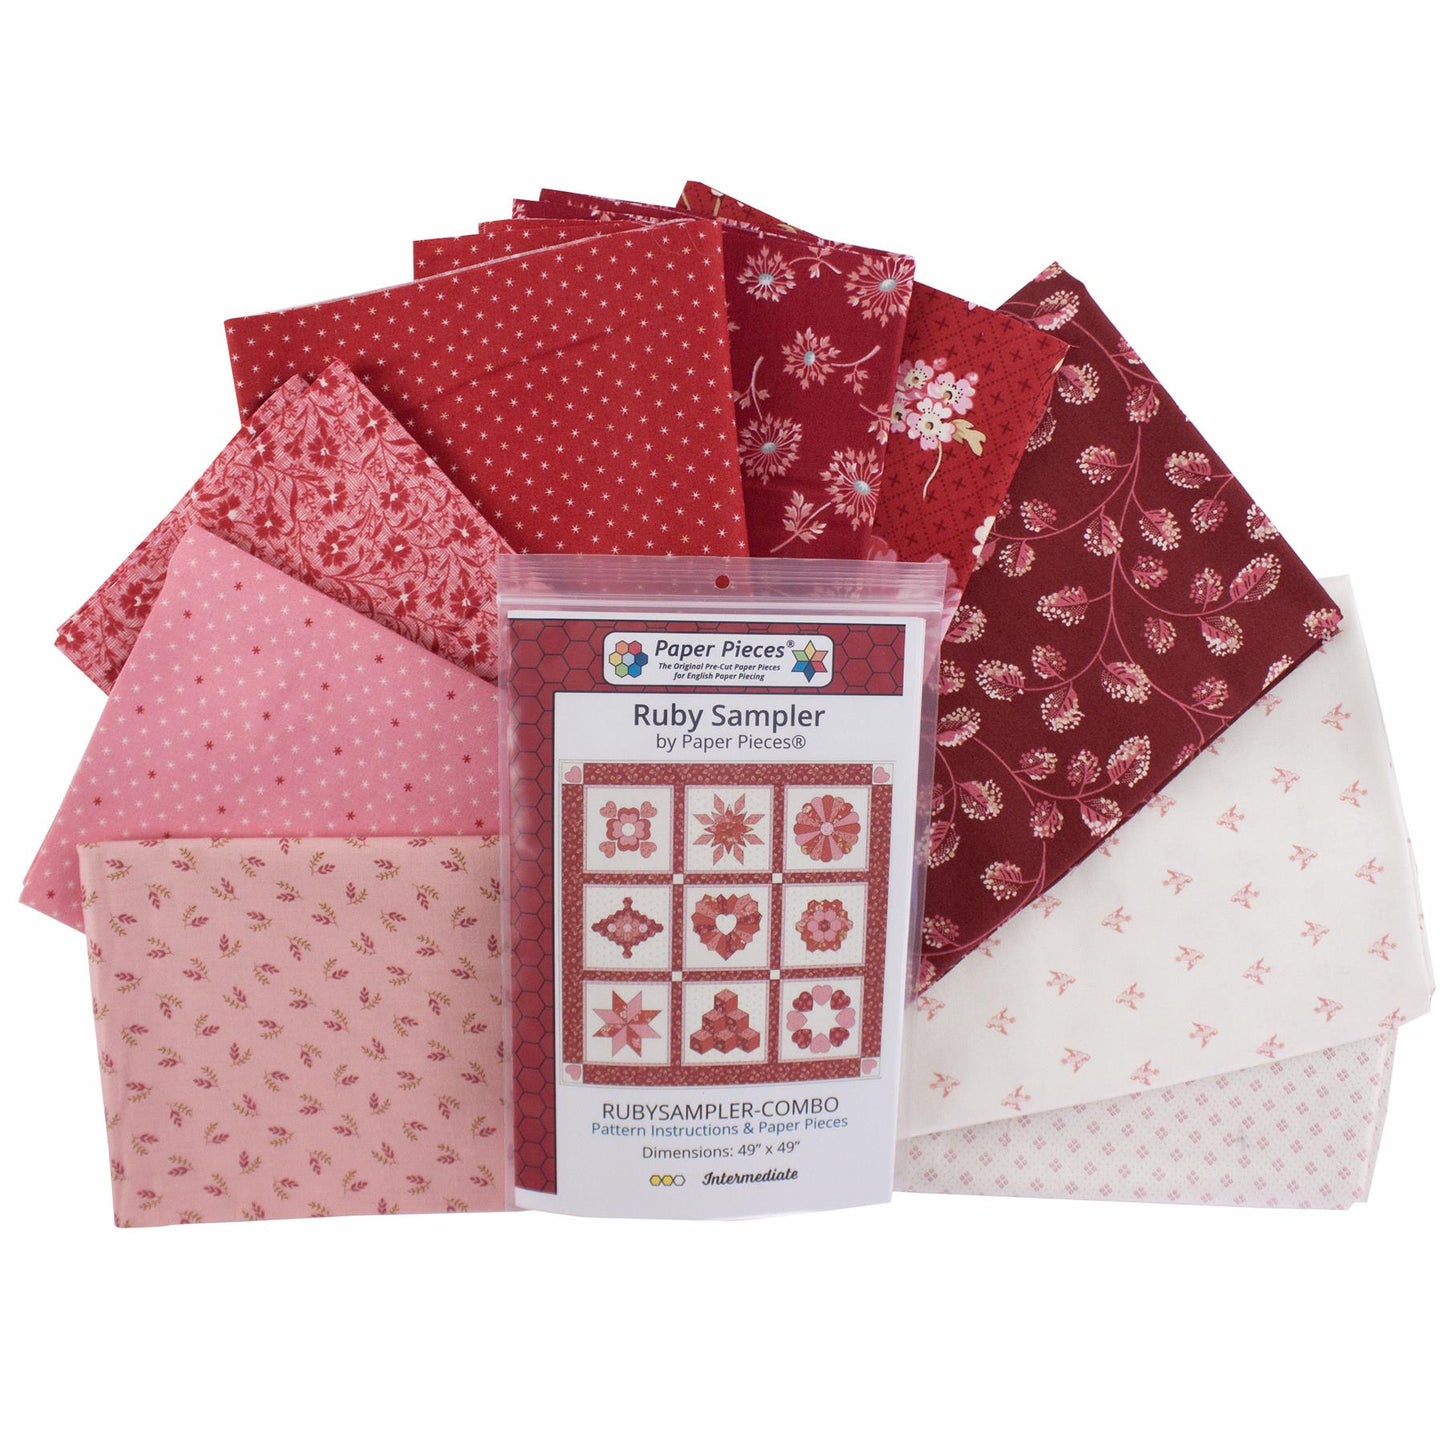 Ruby Sampler Bundle 2 by Paper Pieces | Save over 10%